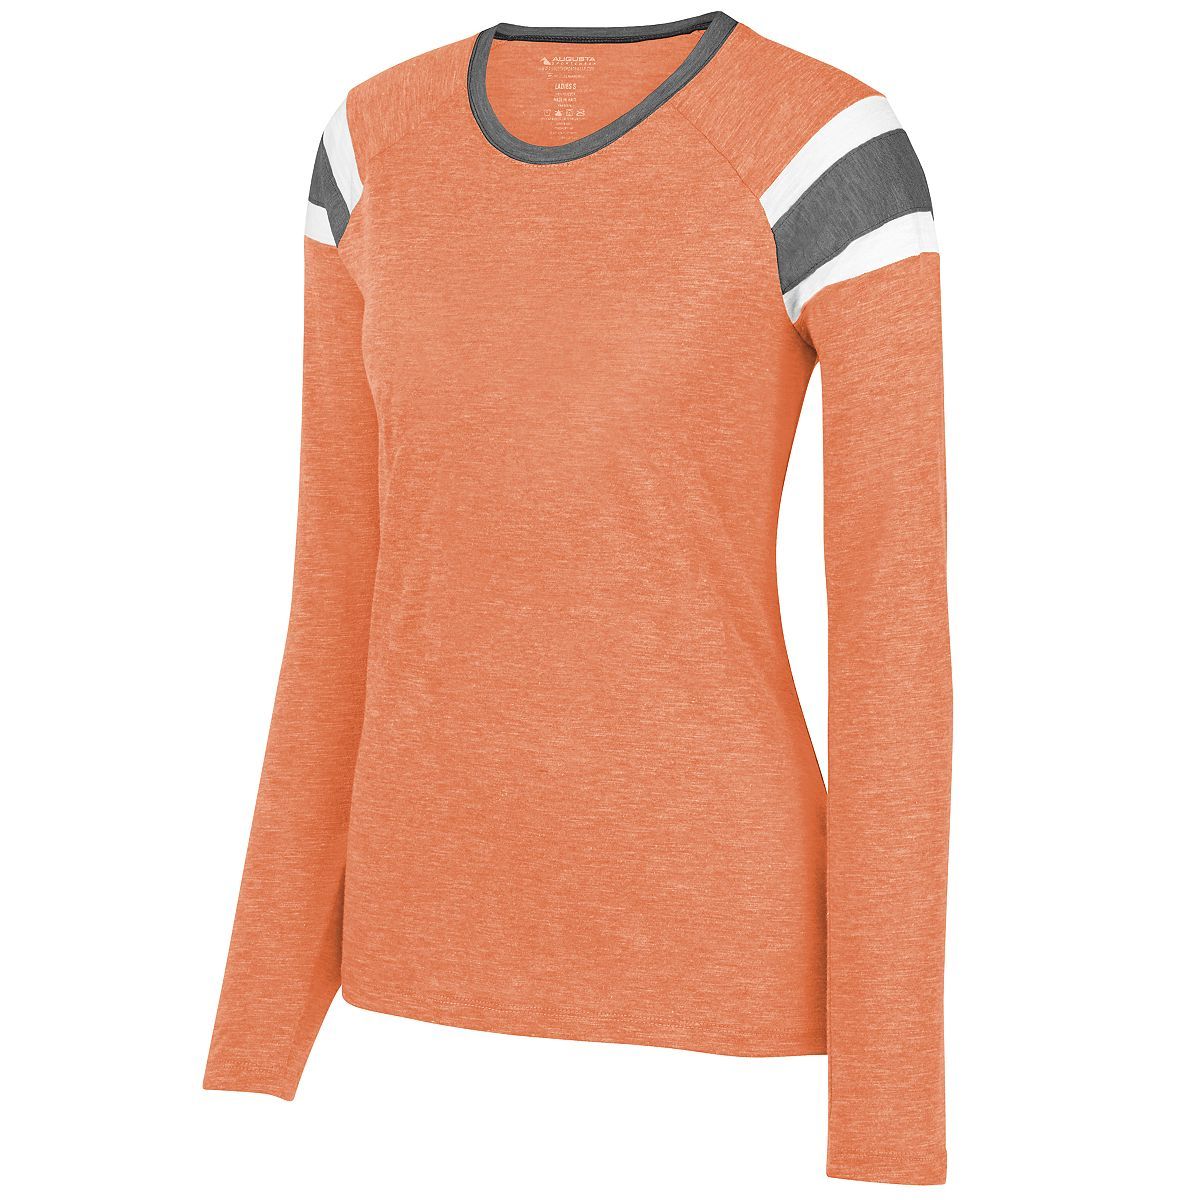 Augusta Sportswear Ladies Long Sleeve Fanatic Tee in Light Orange/Slate/White  -Part of the Ladies, Ladies-Tee-Shirt, T-Shirts, Augusta-Products, Shirts product lines at KanaleyCreations.com